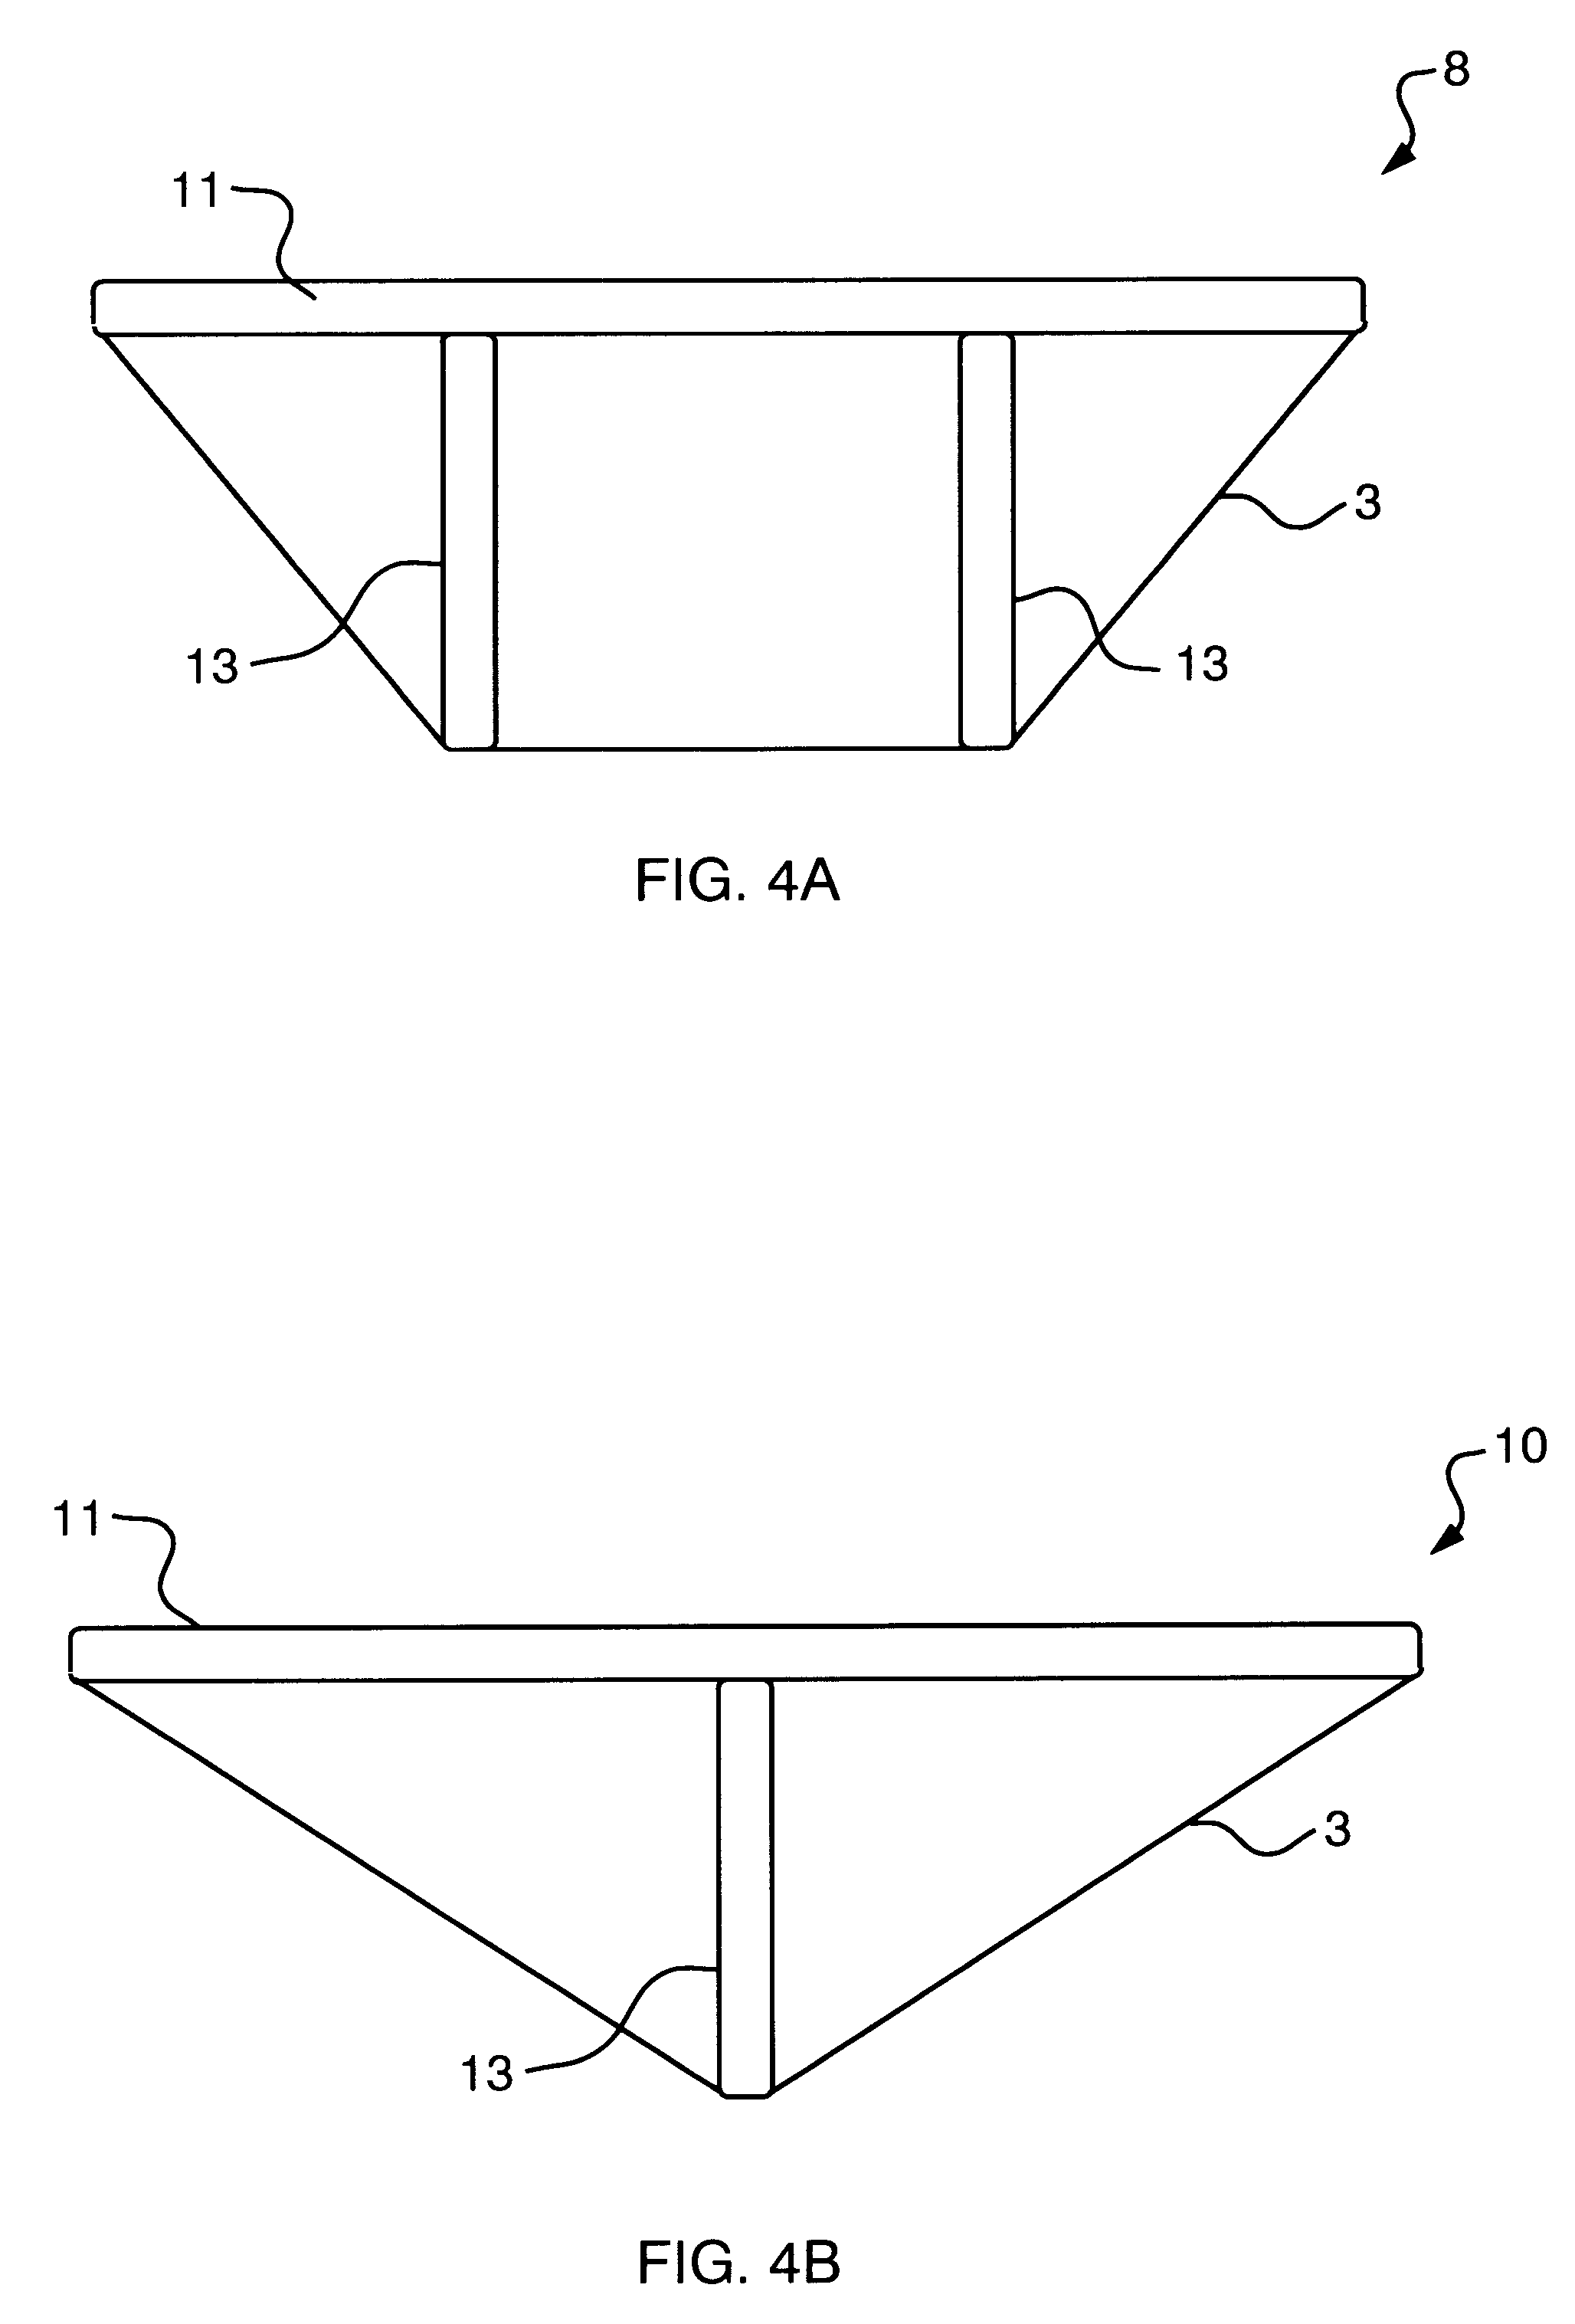 Prestressing system for wood structures and elements